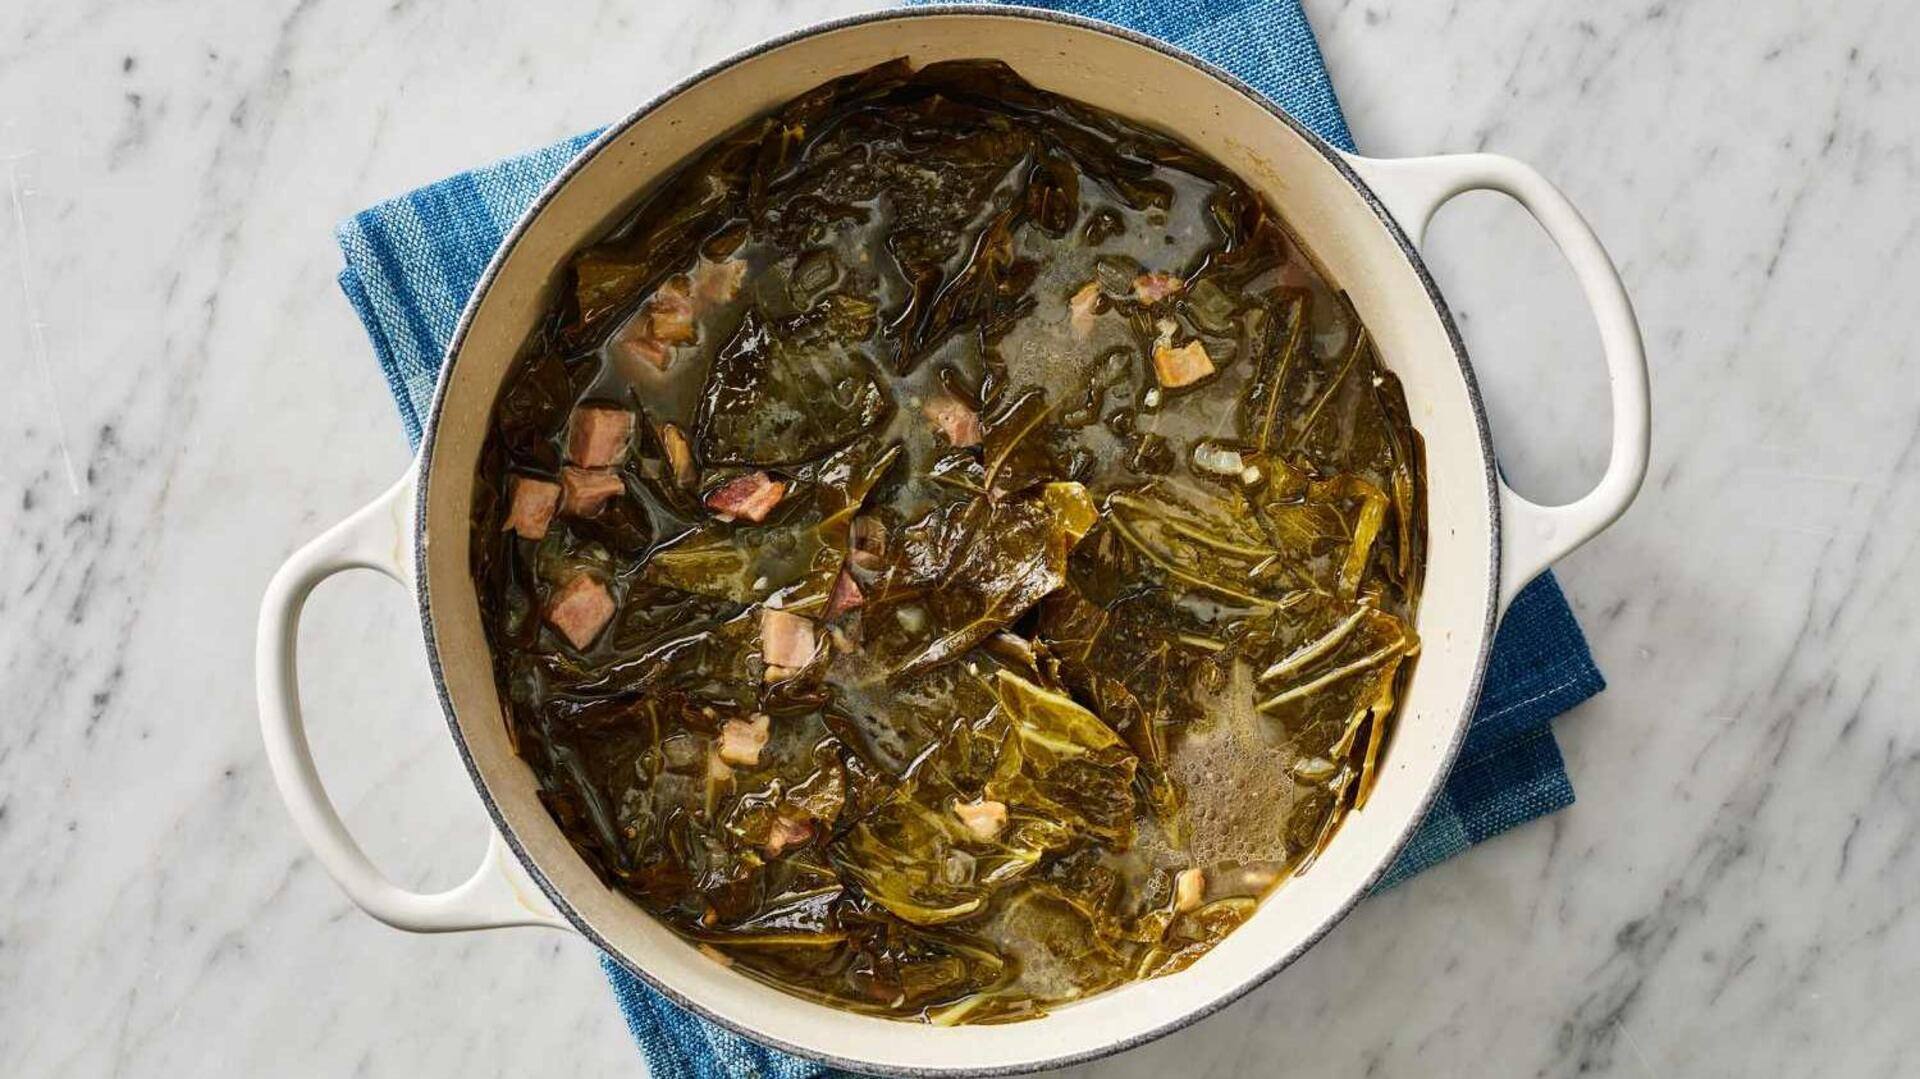 A Southern American-inspired collard greens recipe to impress your guests